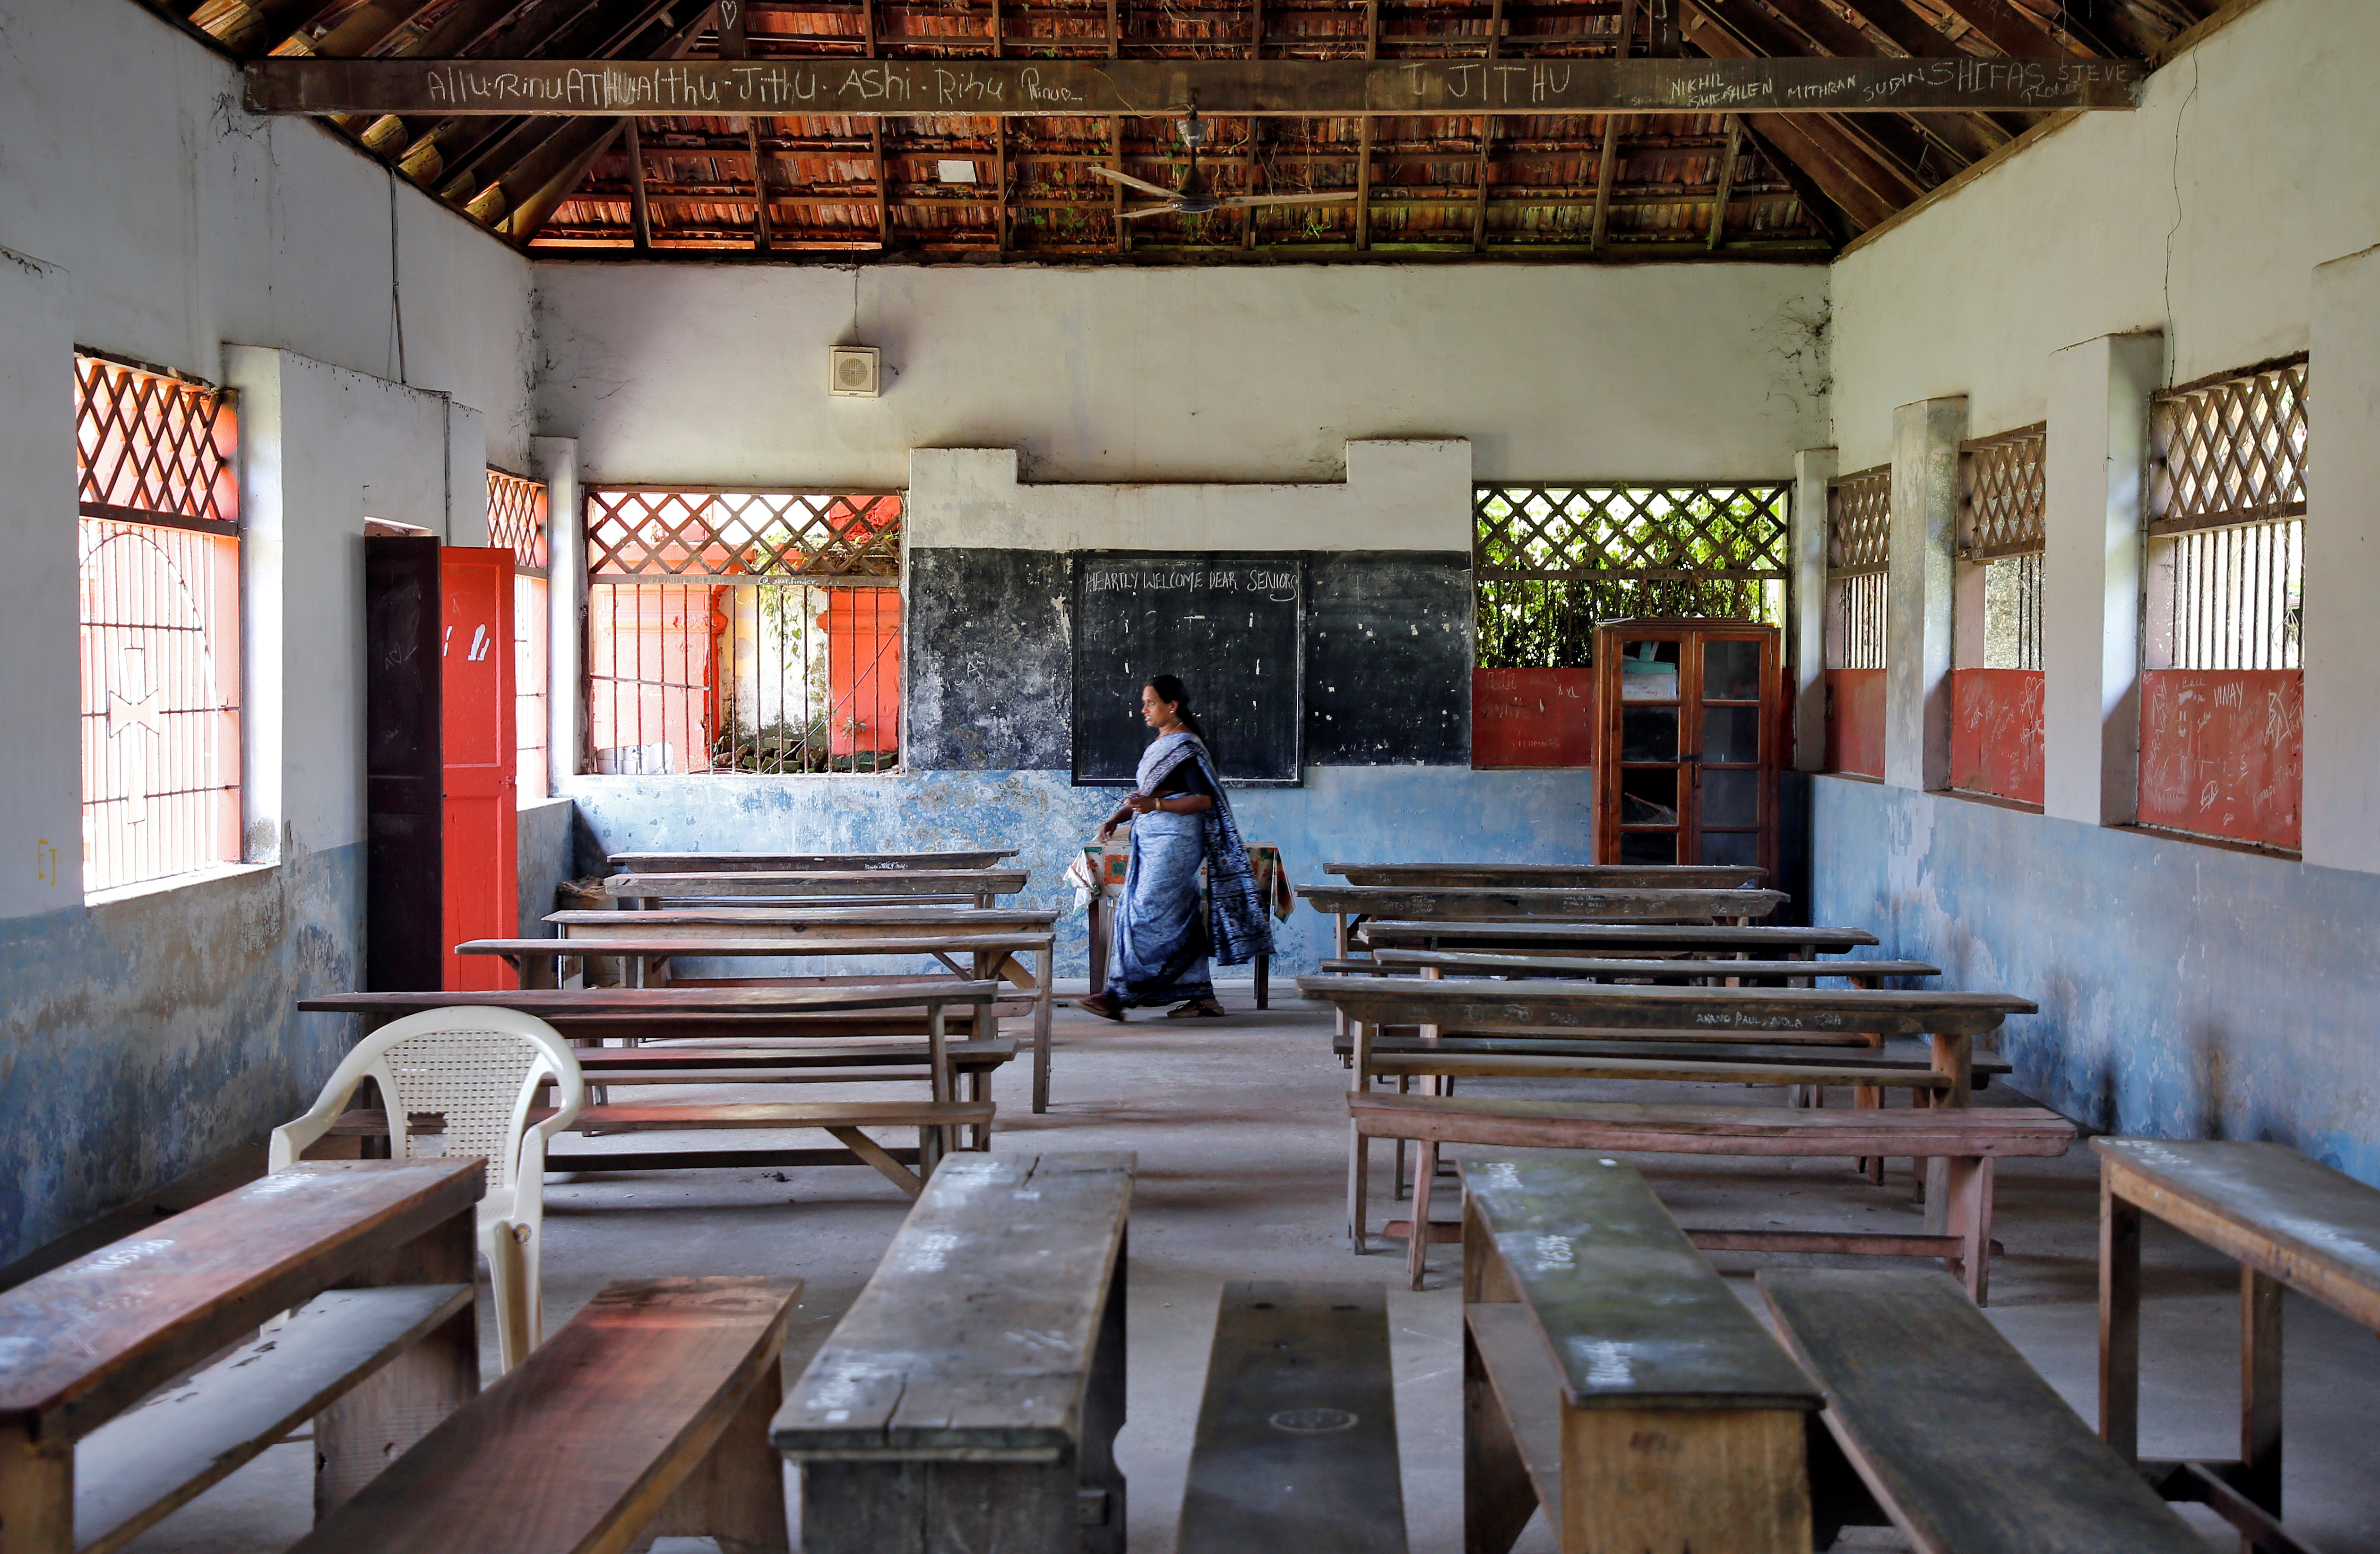 A staff member walks inside an empty classroom of a school after Kerala state government ordered the closure of schools across the state, amid coronavirus fears, in Kochi